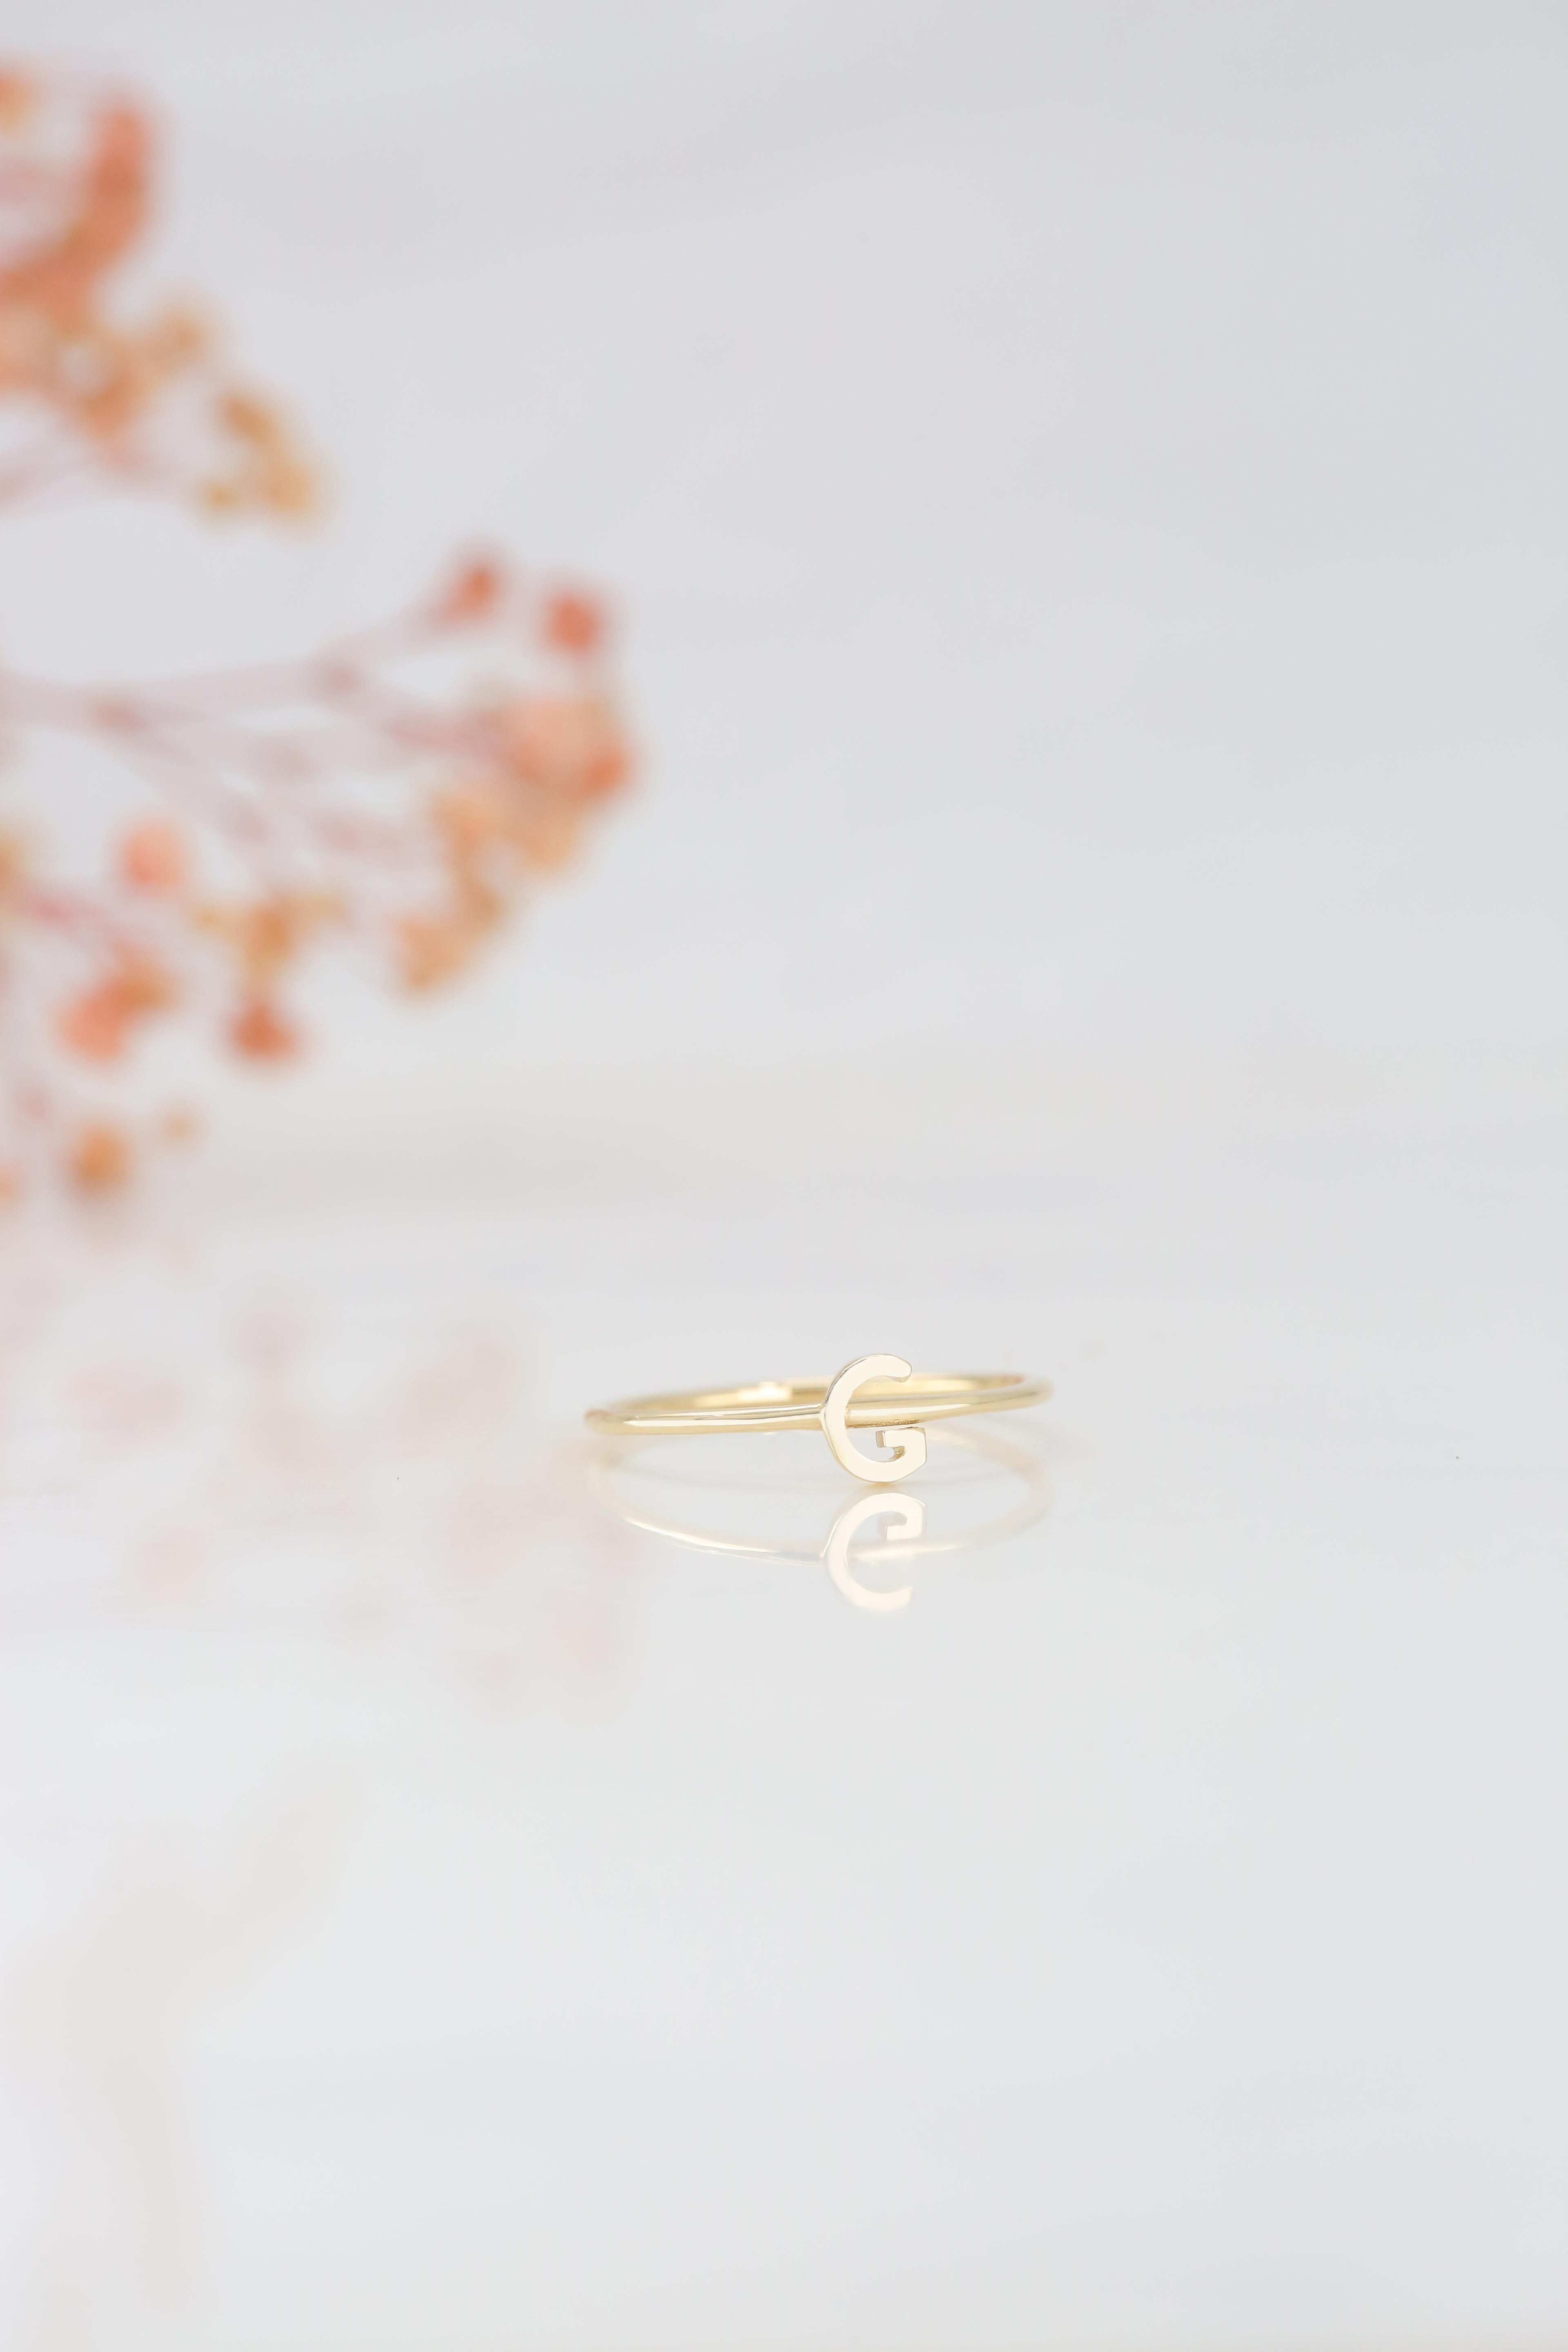 For Sale:  14K Gold Initial G Letter Ring, Personalized Initial Letter Ring 7